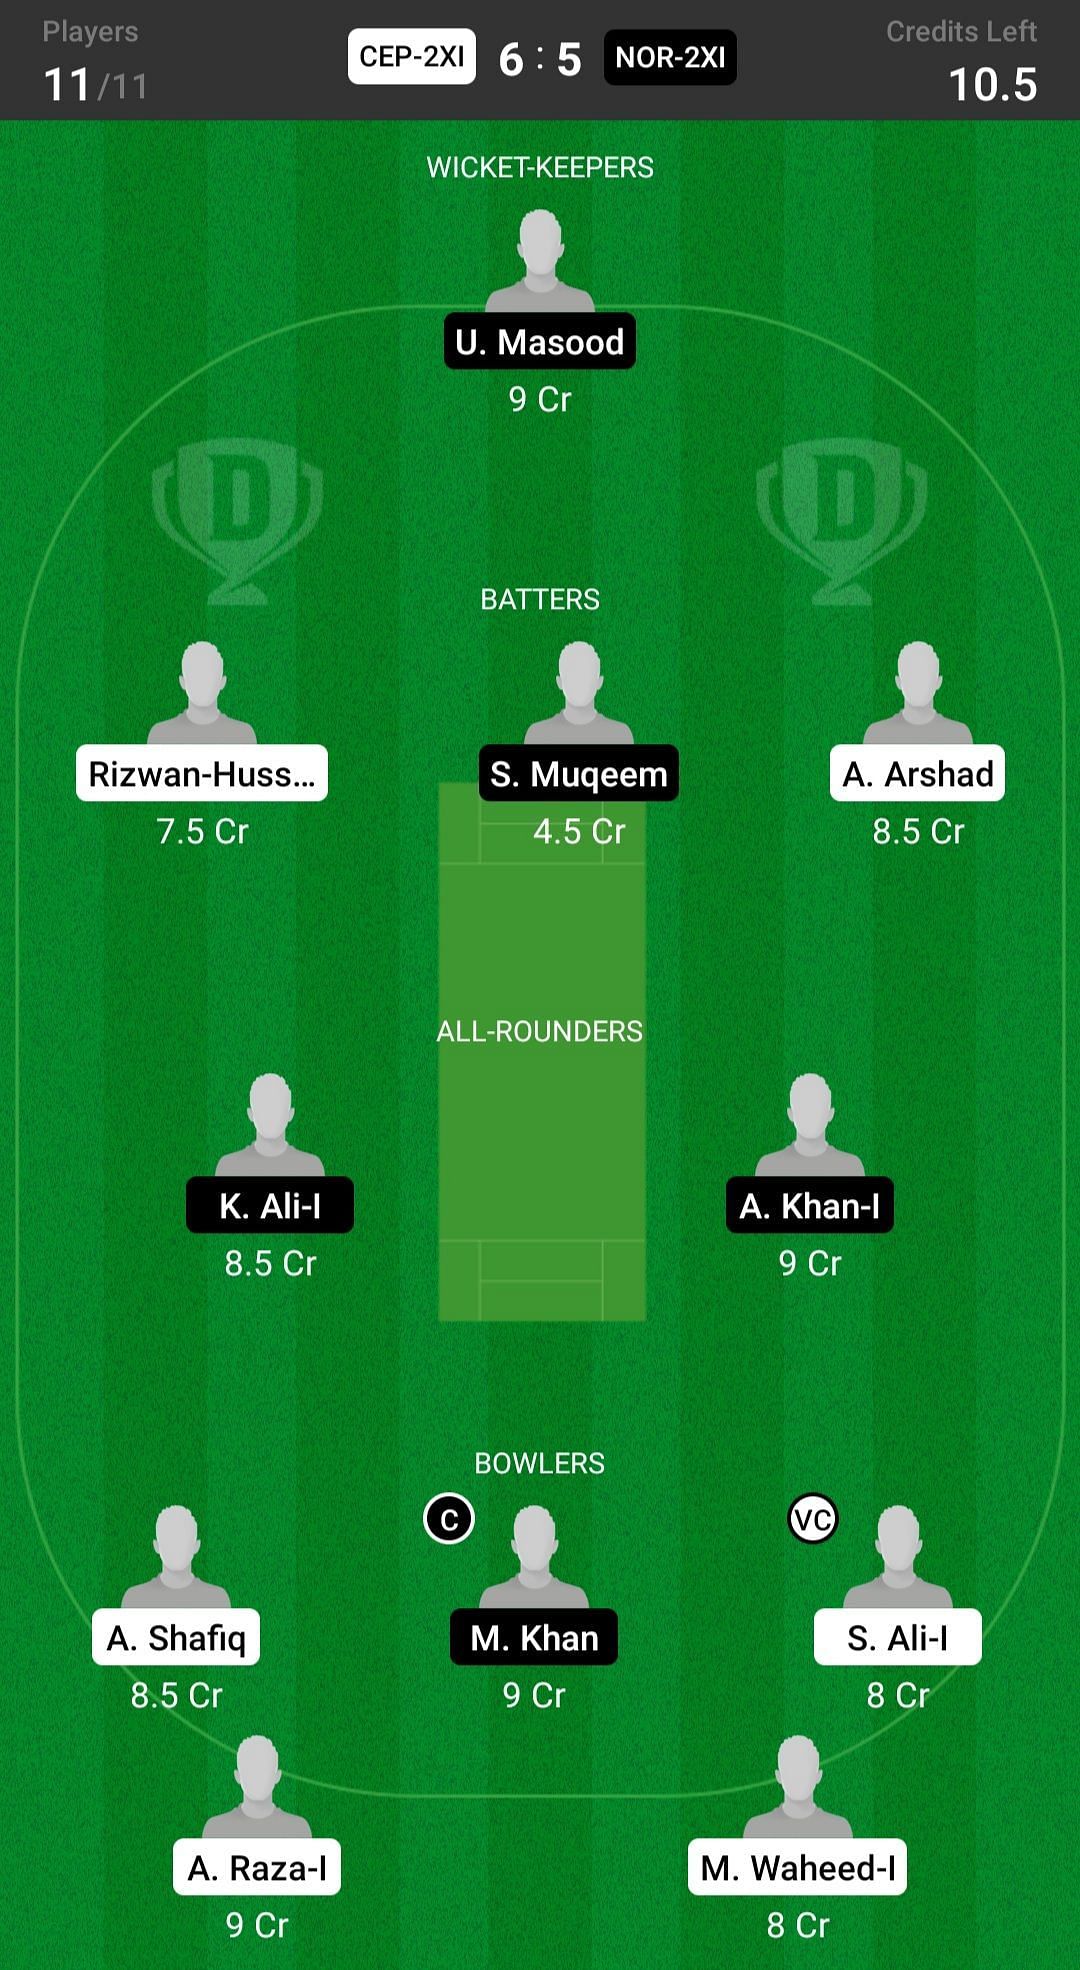 Central Punjab 2nd XI vs Northern 2nd XI Fantasy suggestion #2